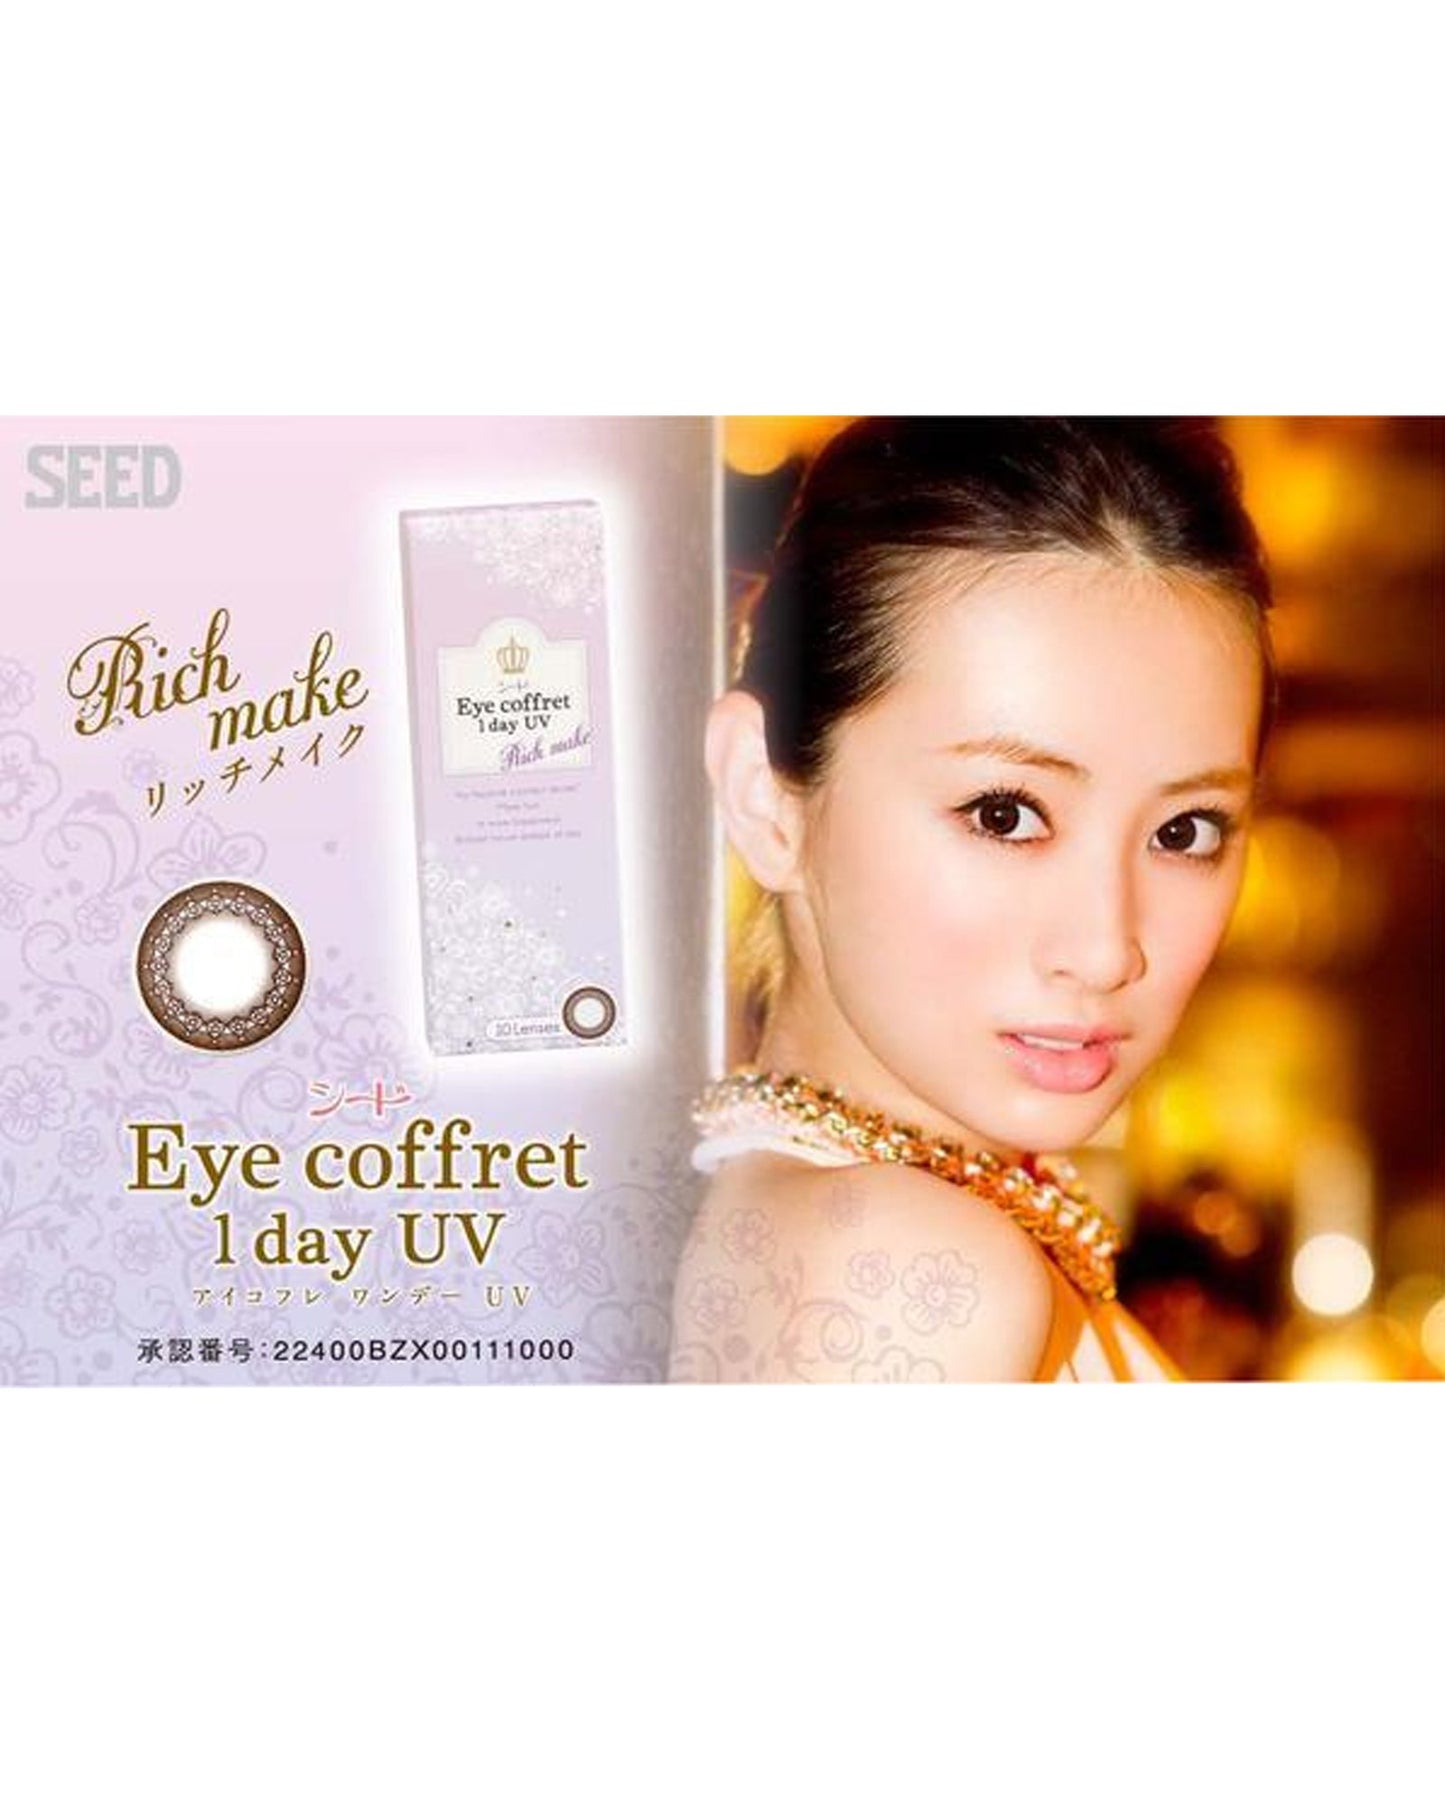 Eye Coffret 1 Day UV (30 Lenses pack) - Eleven Eleven Contact Lens and Vision Care Experts